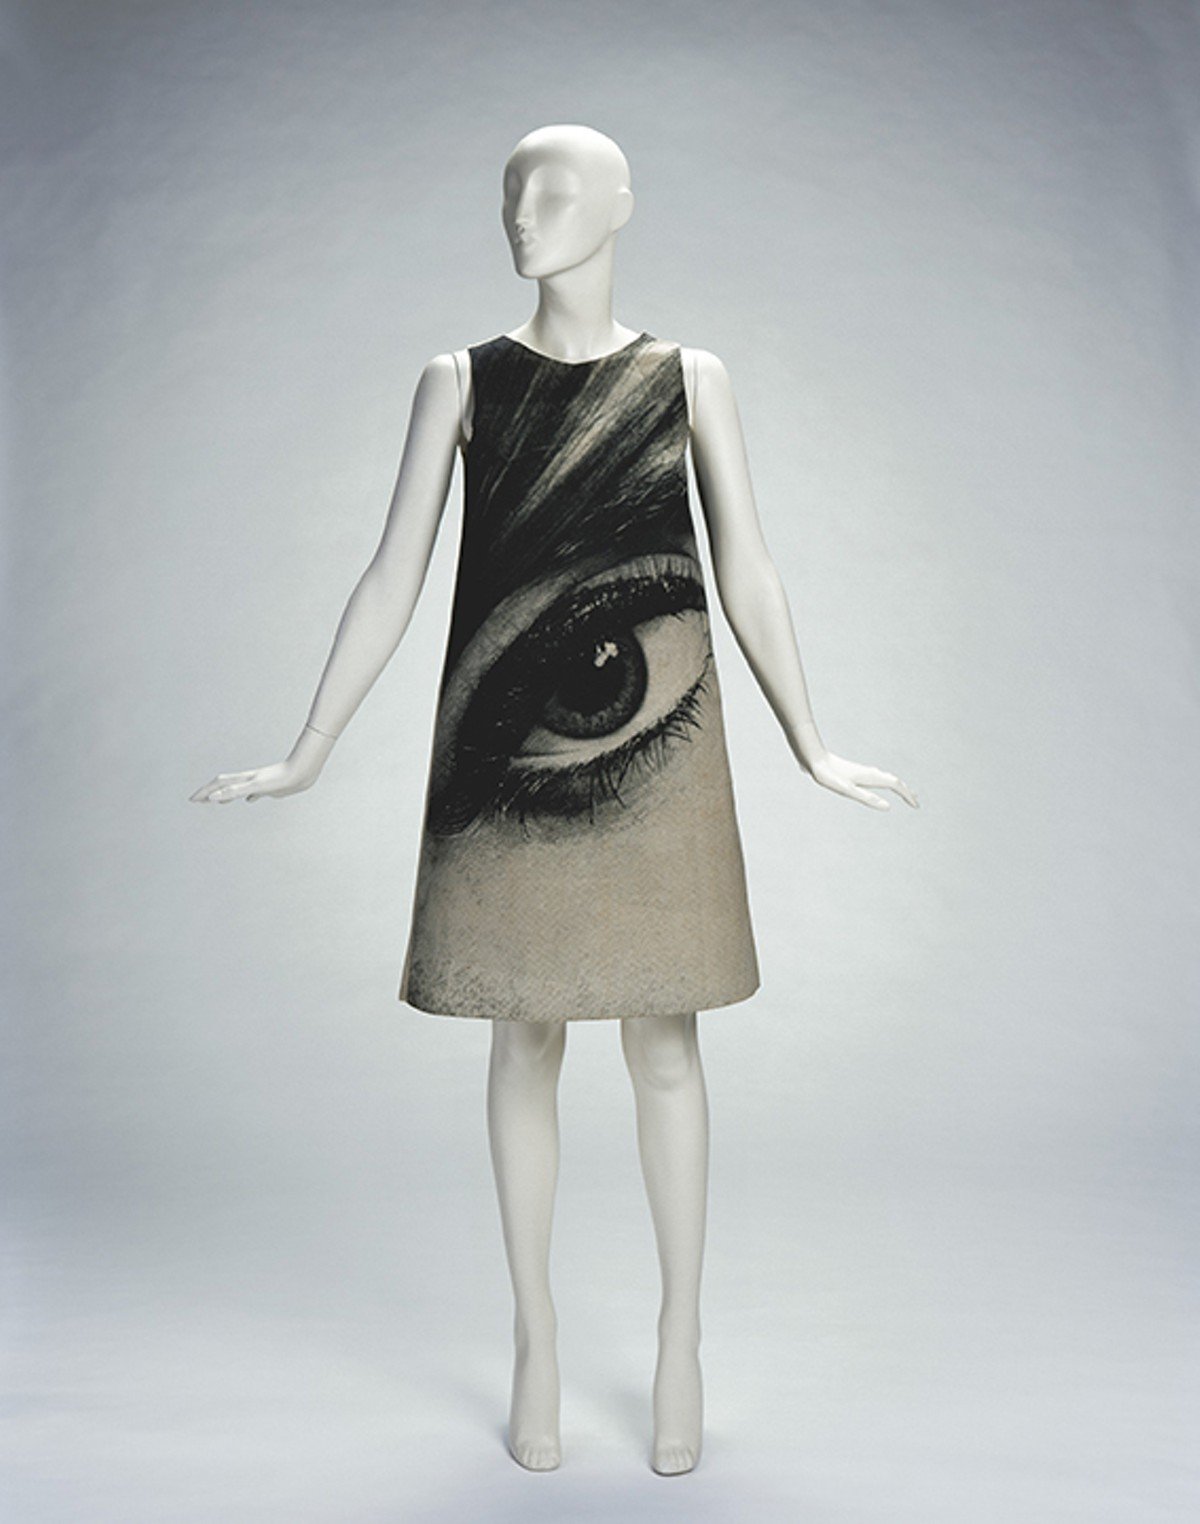 The Harry Gordon Poster Dress on display in Simply Brilliant: Artist-Jewelers of the 1960s and 1970s at the Cincinnati Art Museum